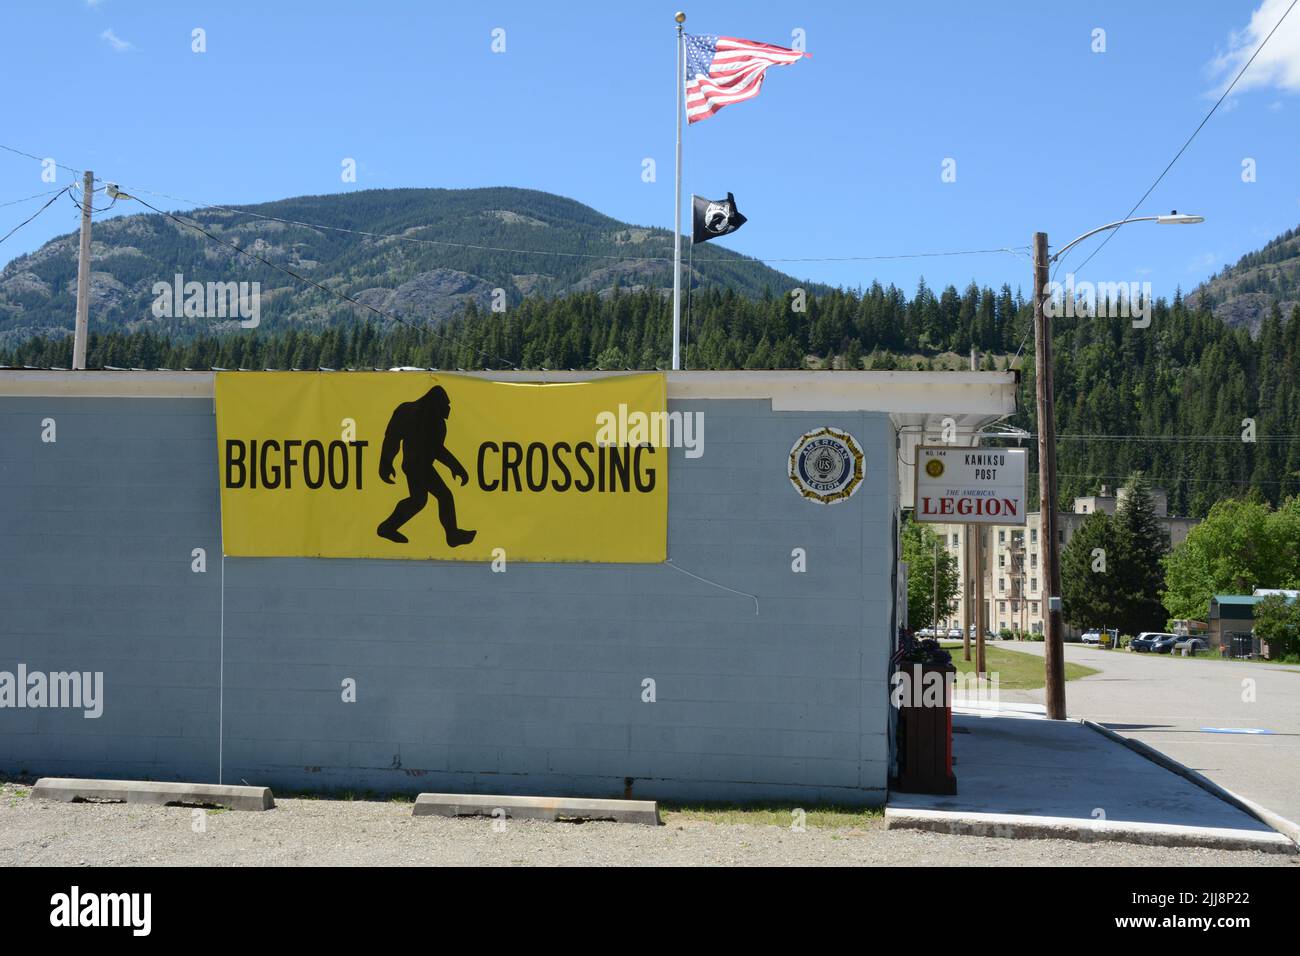 A Bigfoot Crossing banner on the side of an American Legion Hall in the town of Metaline Falls, Pend-Oreille County, Washington State, USA. Stock Photo